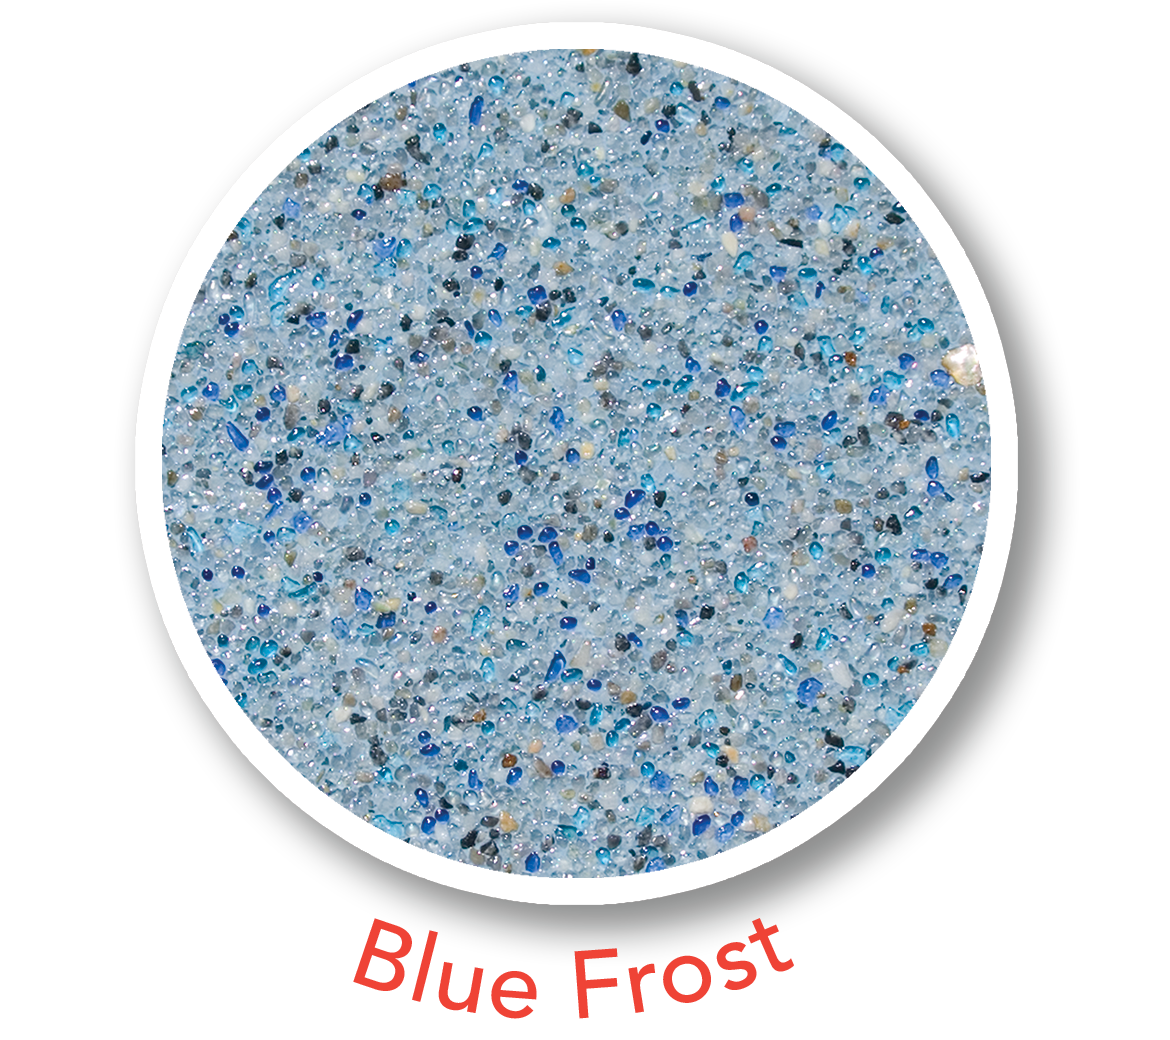 Blue Frost